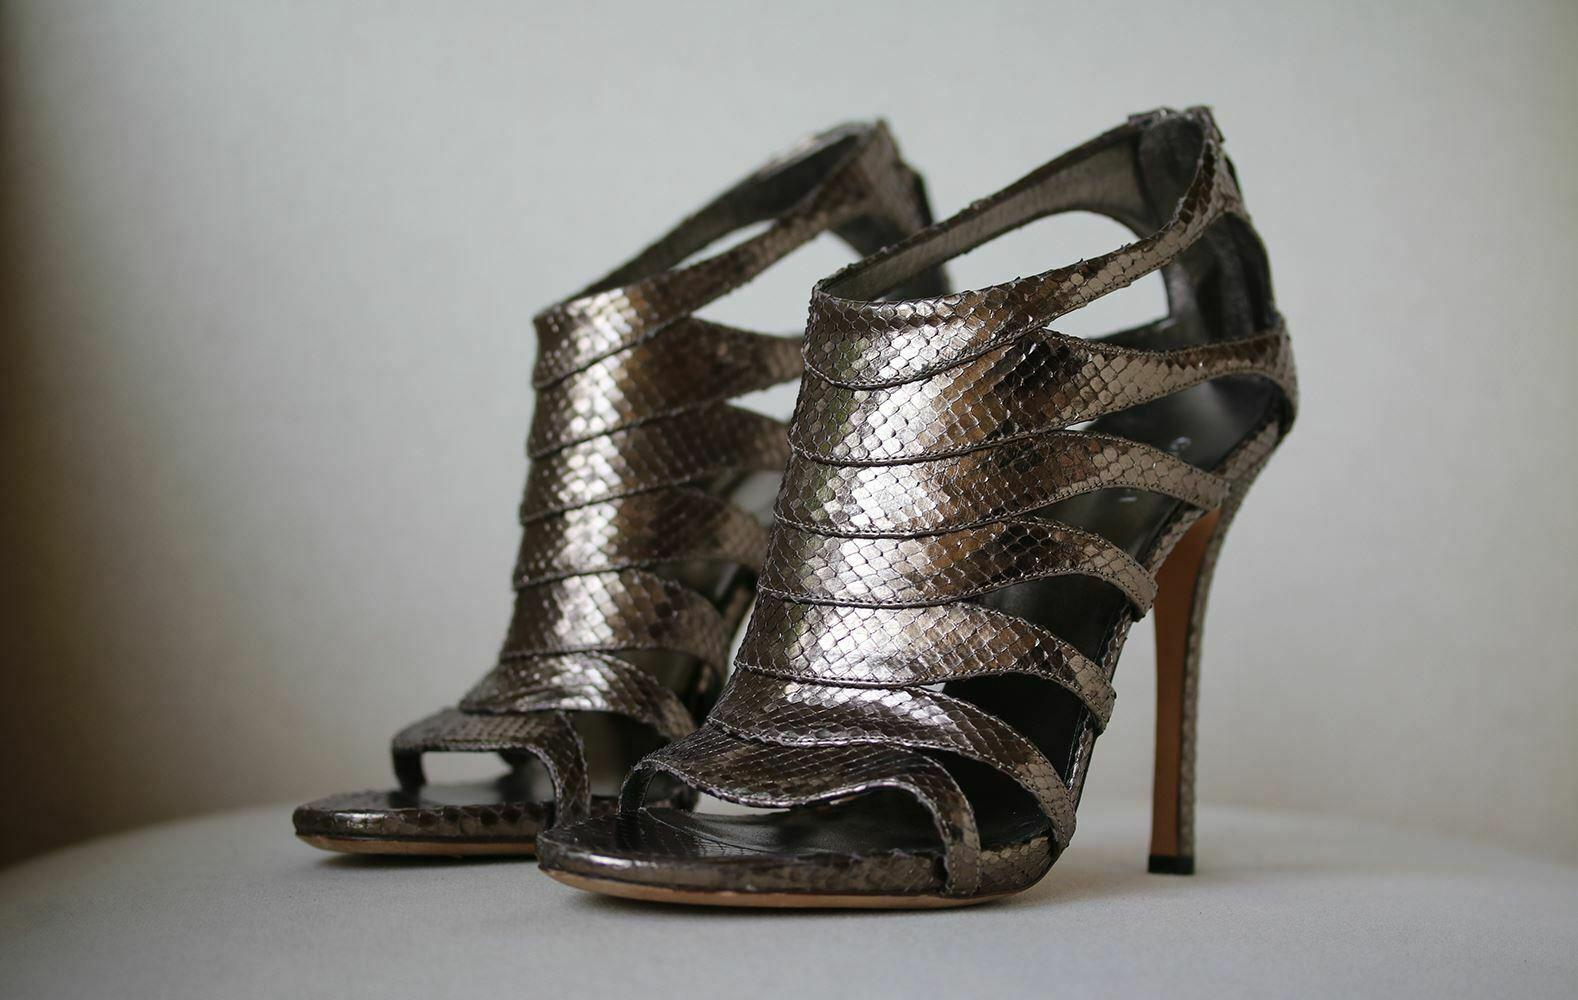 Gucci cutout snakeskin leather sandals. Zip fastening down the back. Leather insole and sole. Metallic gunmetal silver.

Size: EU 38.5 (UK 5.5, US 8.5)

Condition: Worn once. Slightest wear to the soles; see pictures. Otherwise, no sign of wear.